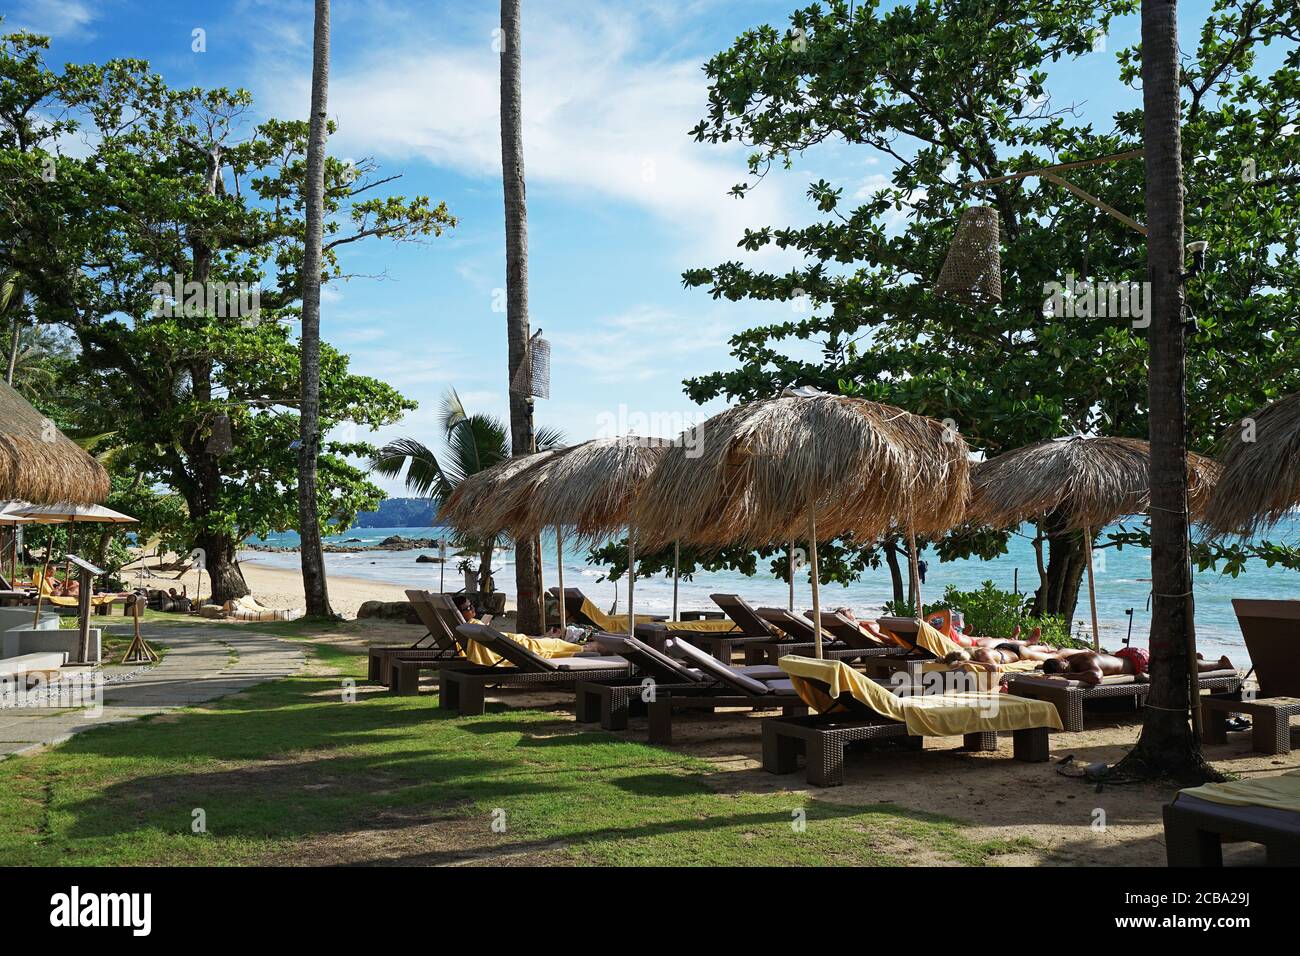 Arrangement and setting of tropical sunbathing daybeds with tourists facing the ocean Stock Photo